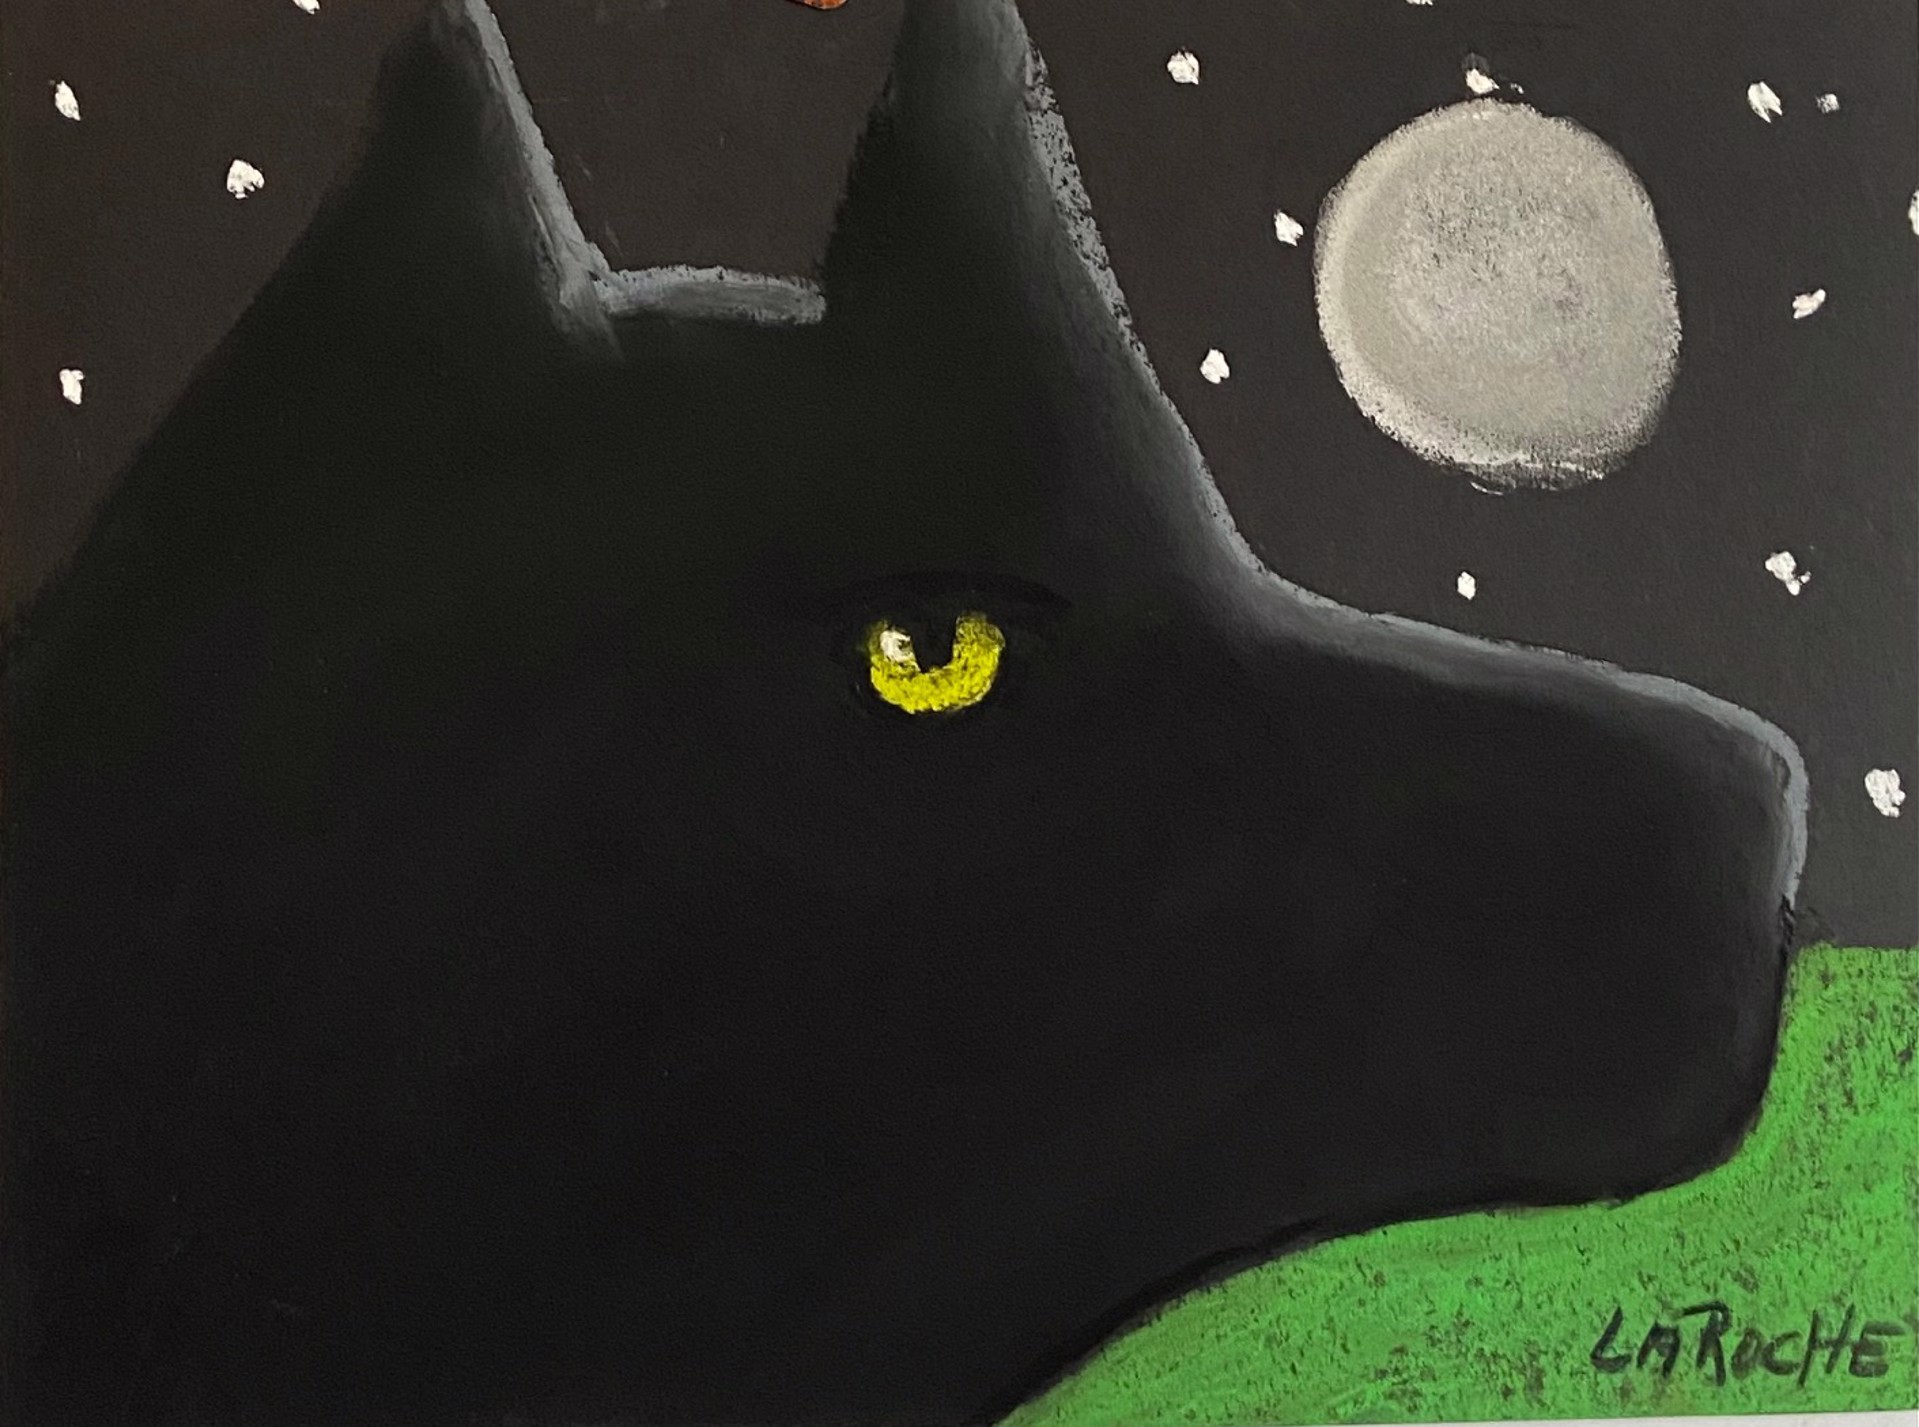 YOUNG MIDNIGHT WOLF by Carole LaRoche